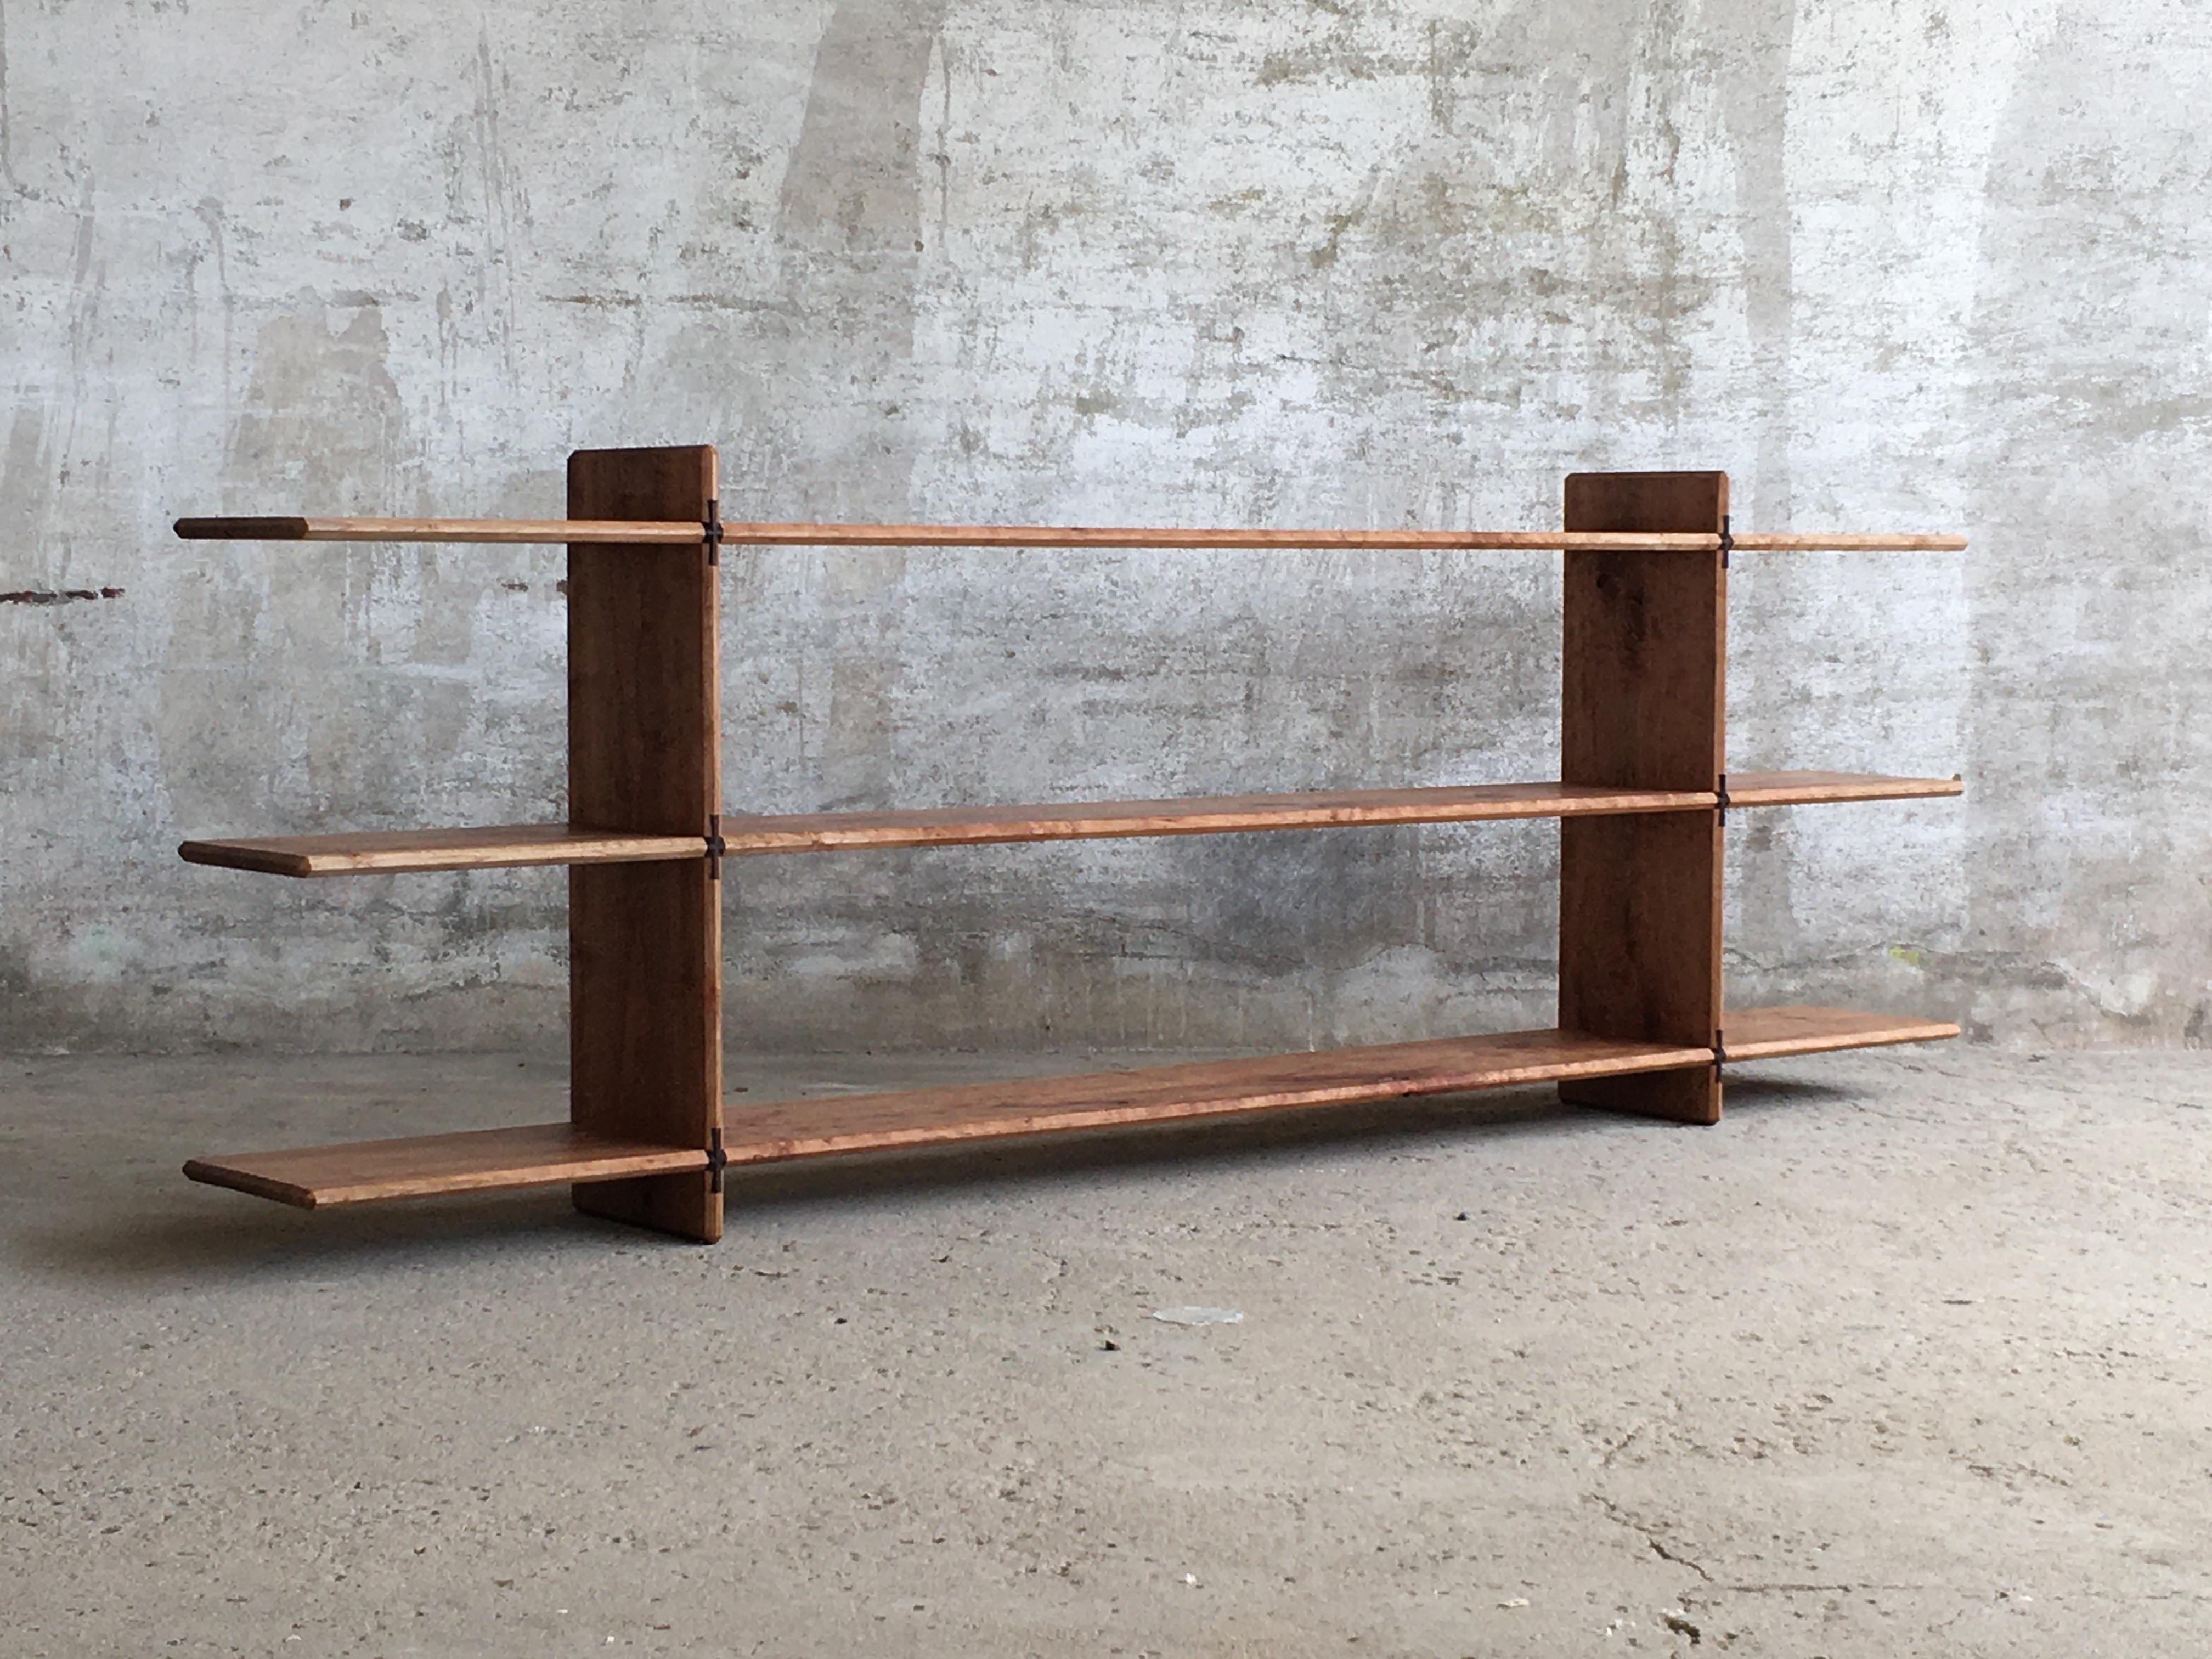 Hand-Crafted AM Shelve, Solid Cherry Wood, Handmade and Designed by Tomaz Viana For Sale